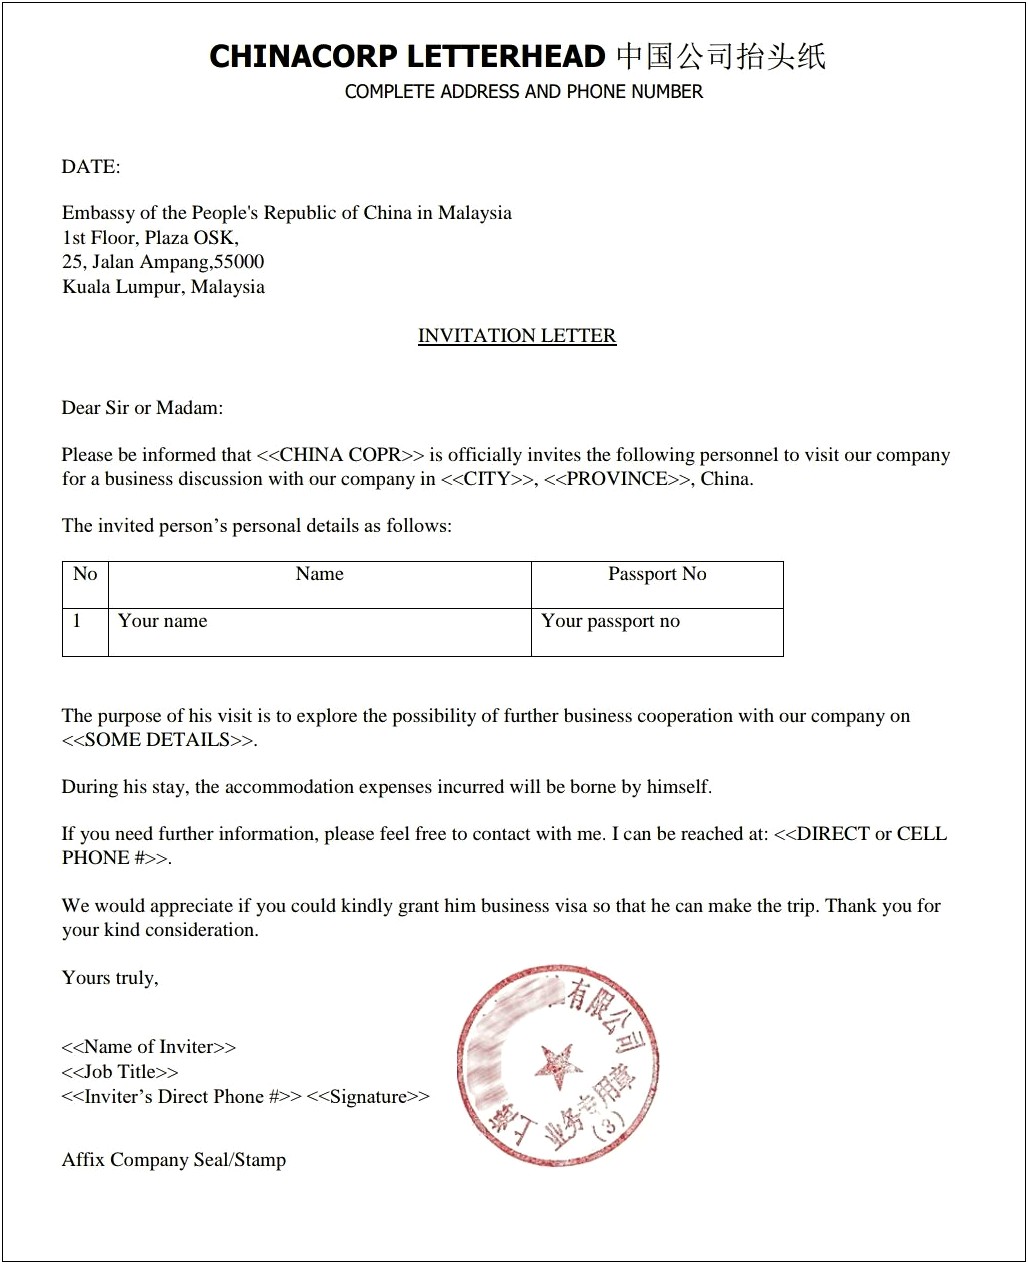 Business Cover Letter For Business Visa China Template